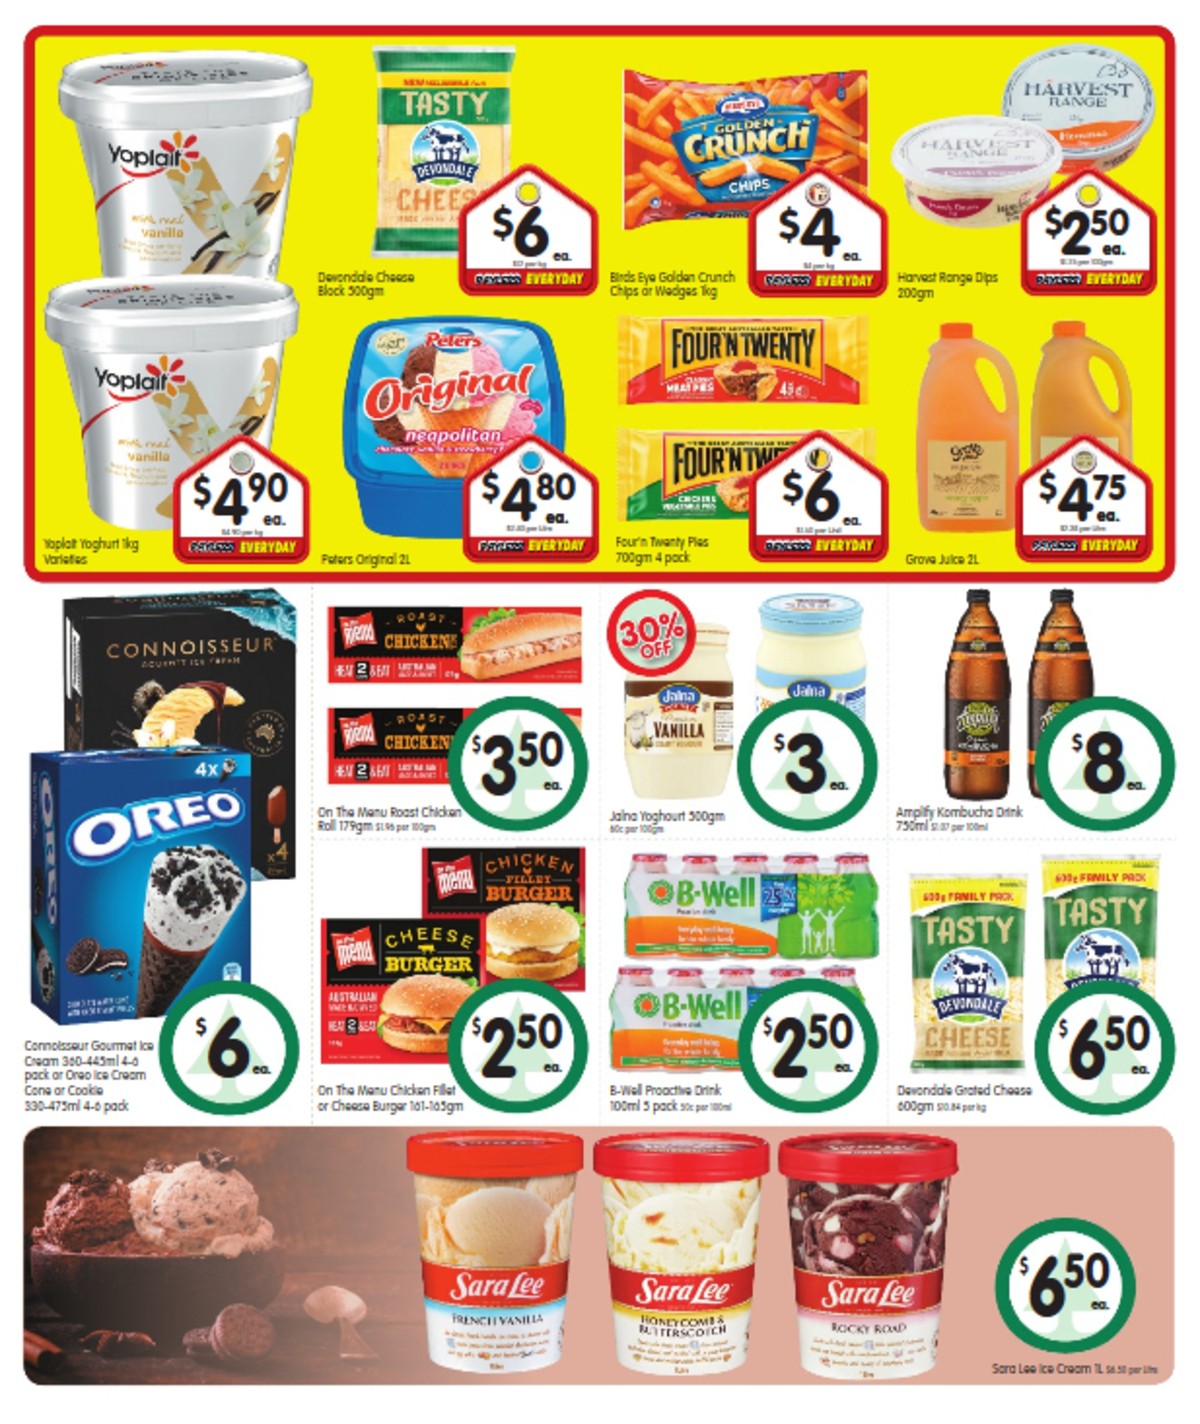 Spar Catalogues from 1 May